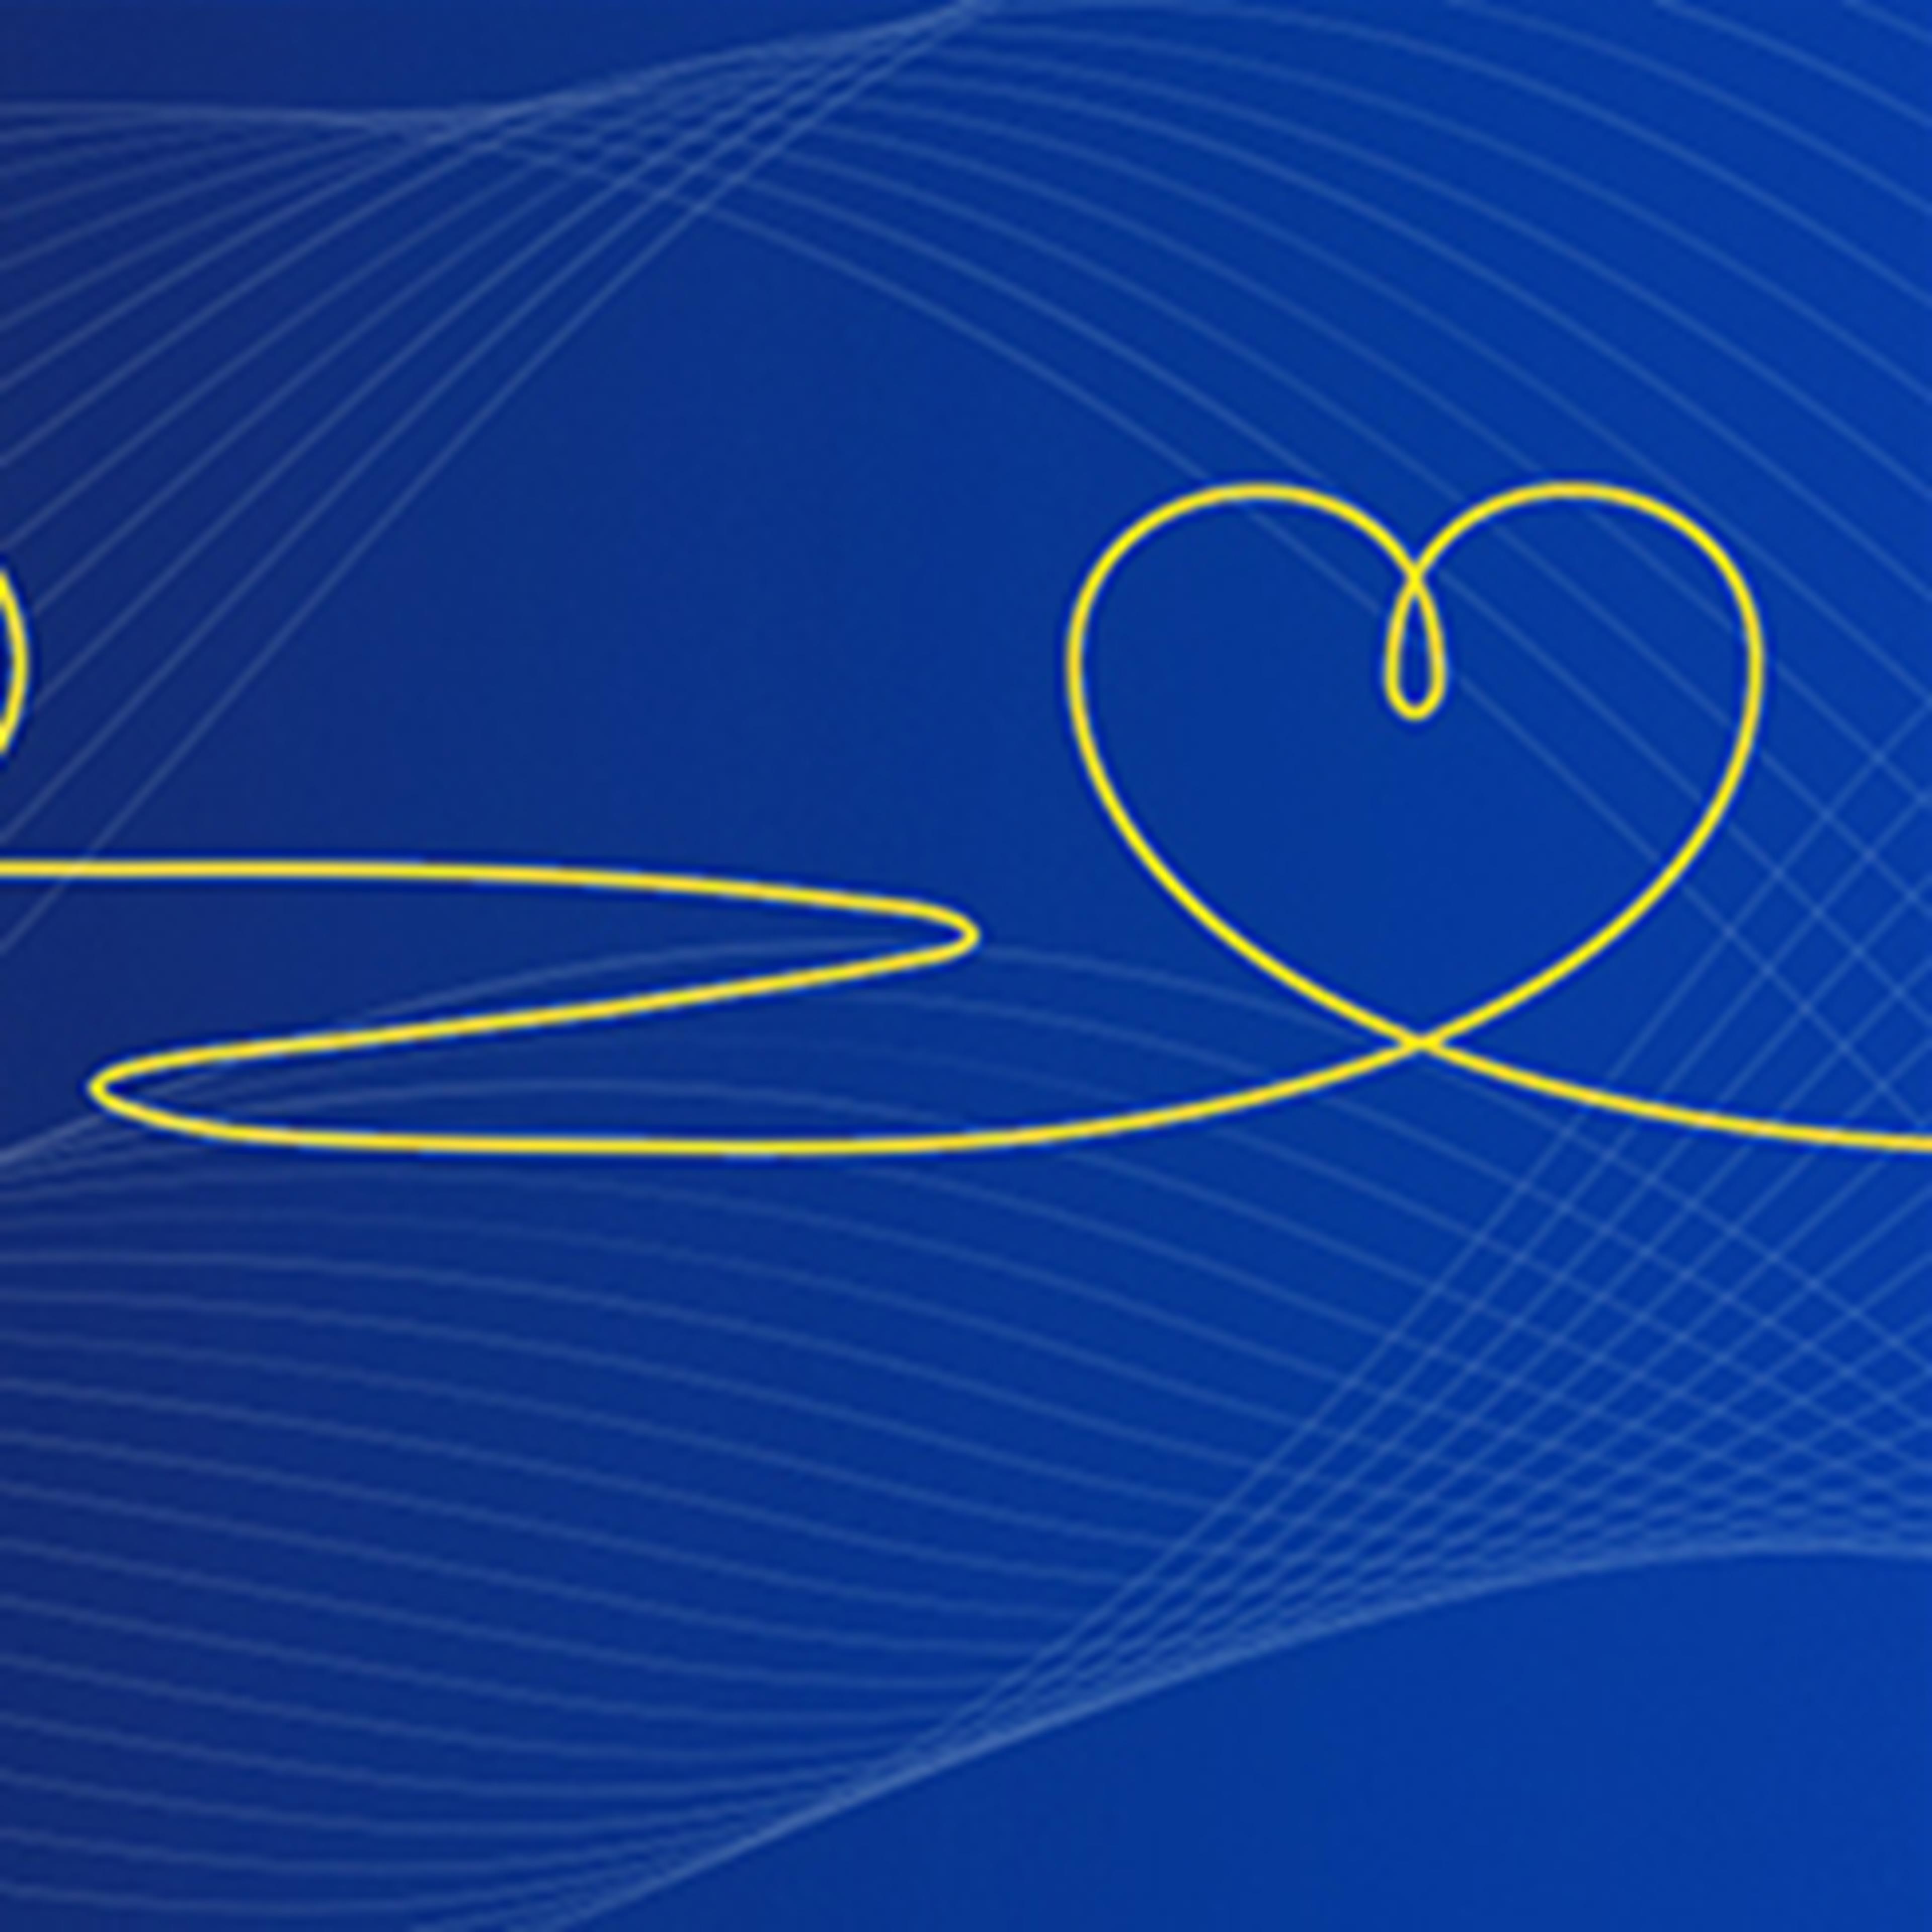 Line with heart over blue background